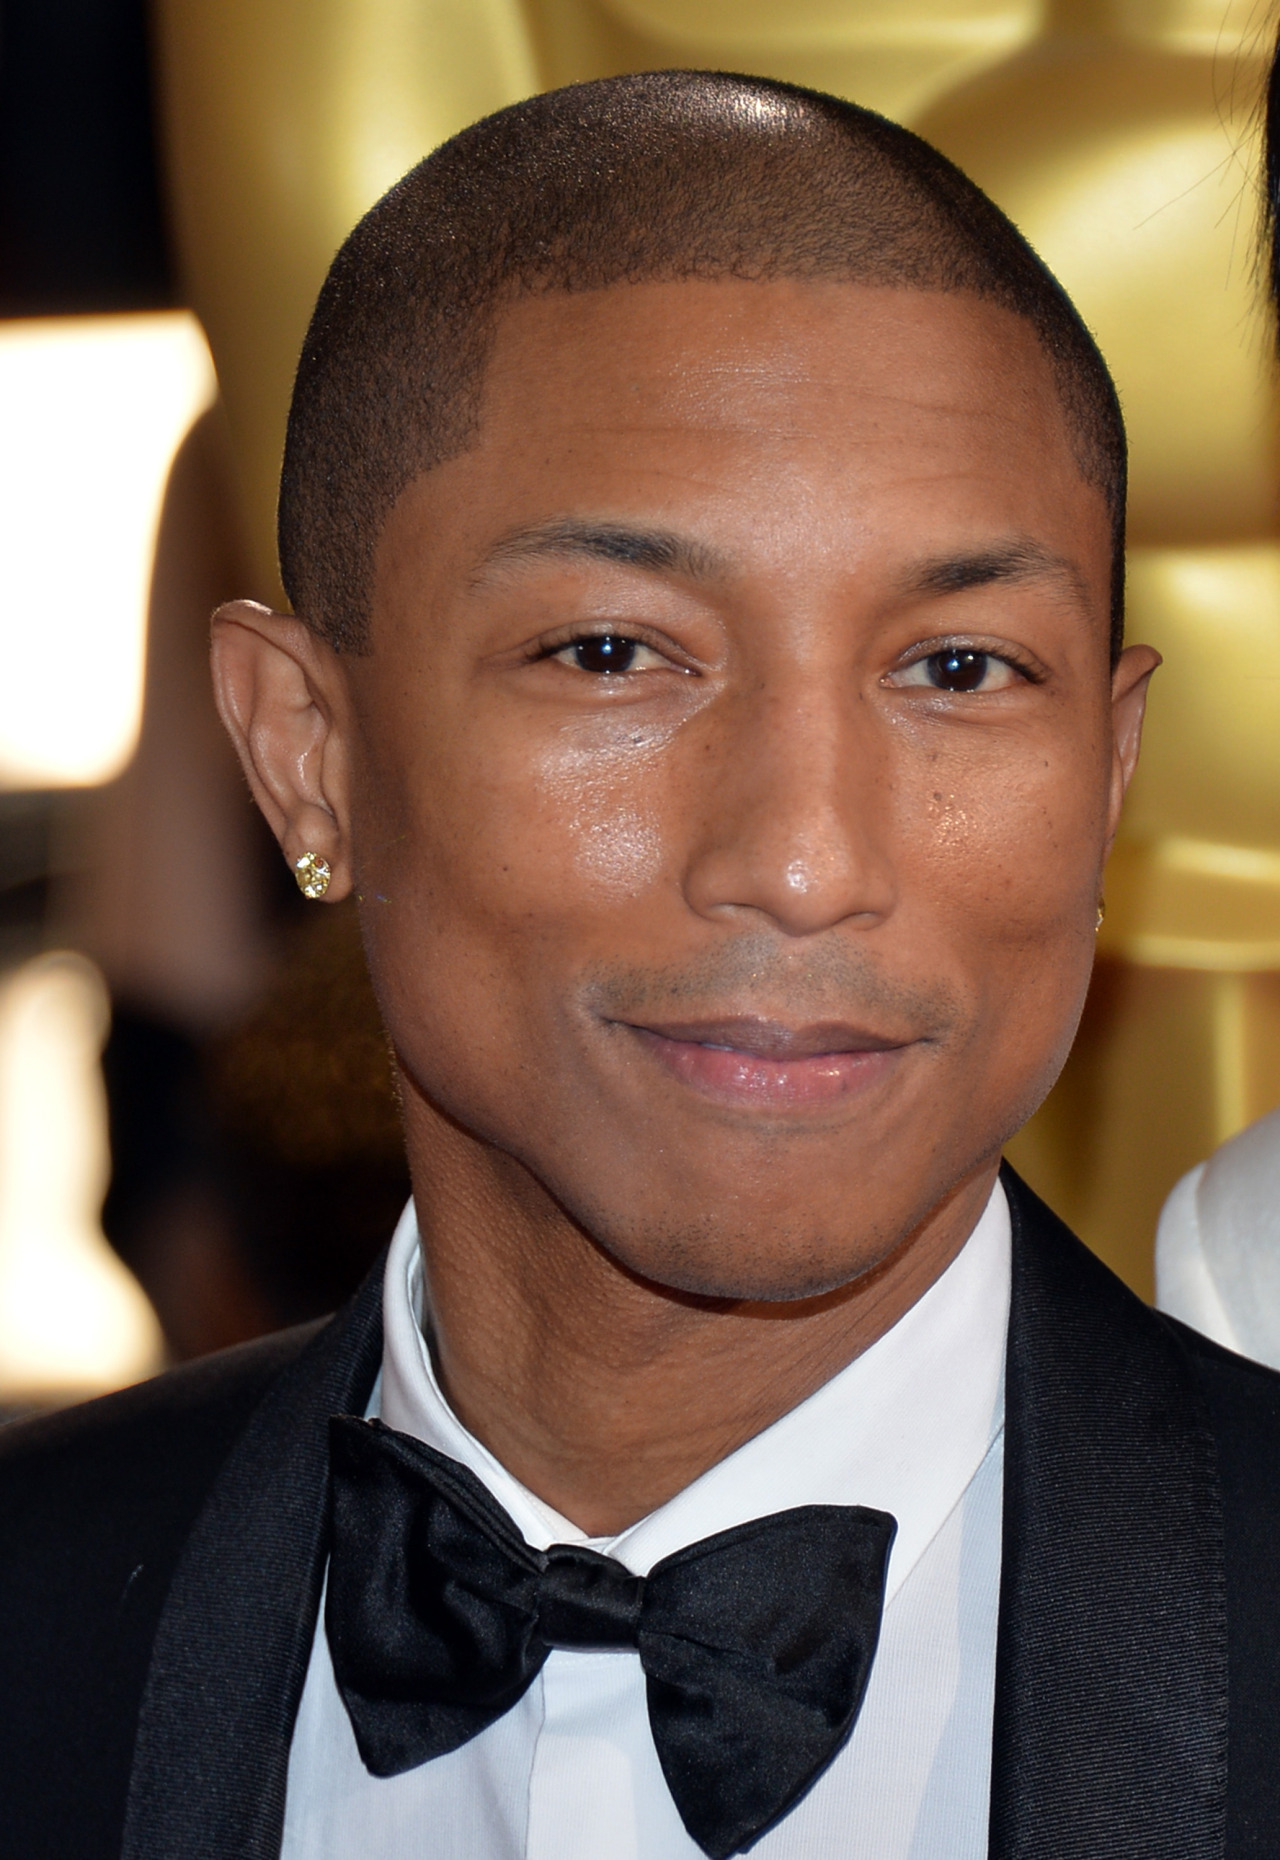 A complete guide to all things Pharrell